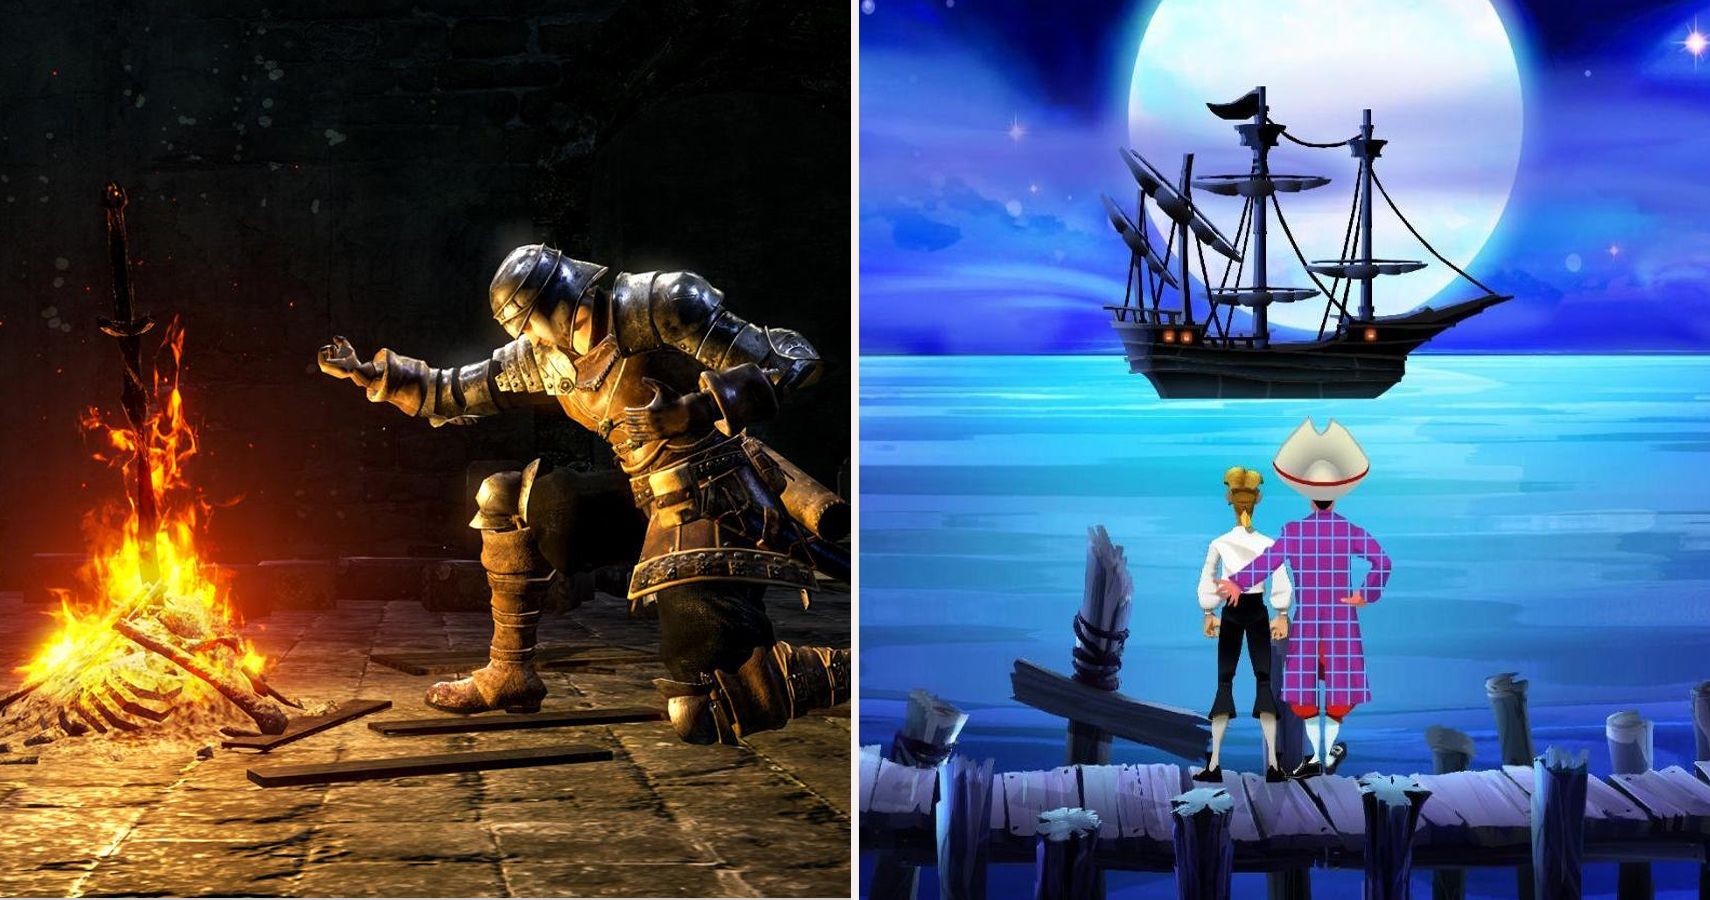 You shouldn't get pirate copied games : r/gaming